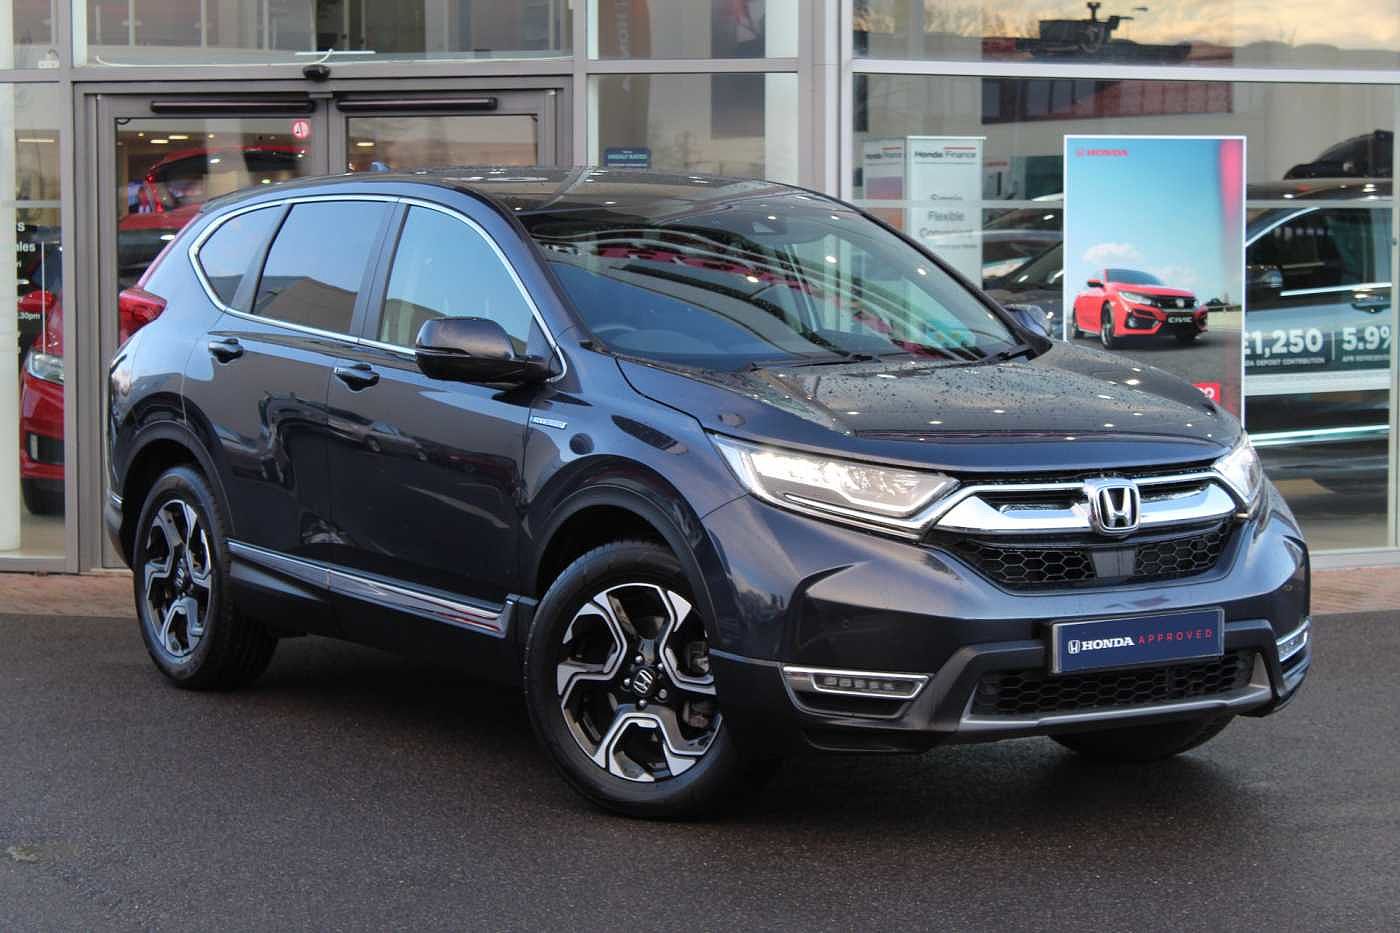 Used Honda CRV Hybrid Compact SUV Buy Approved Second